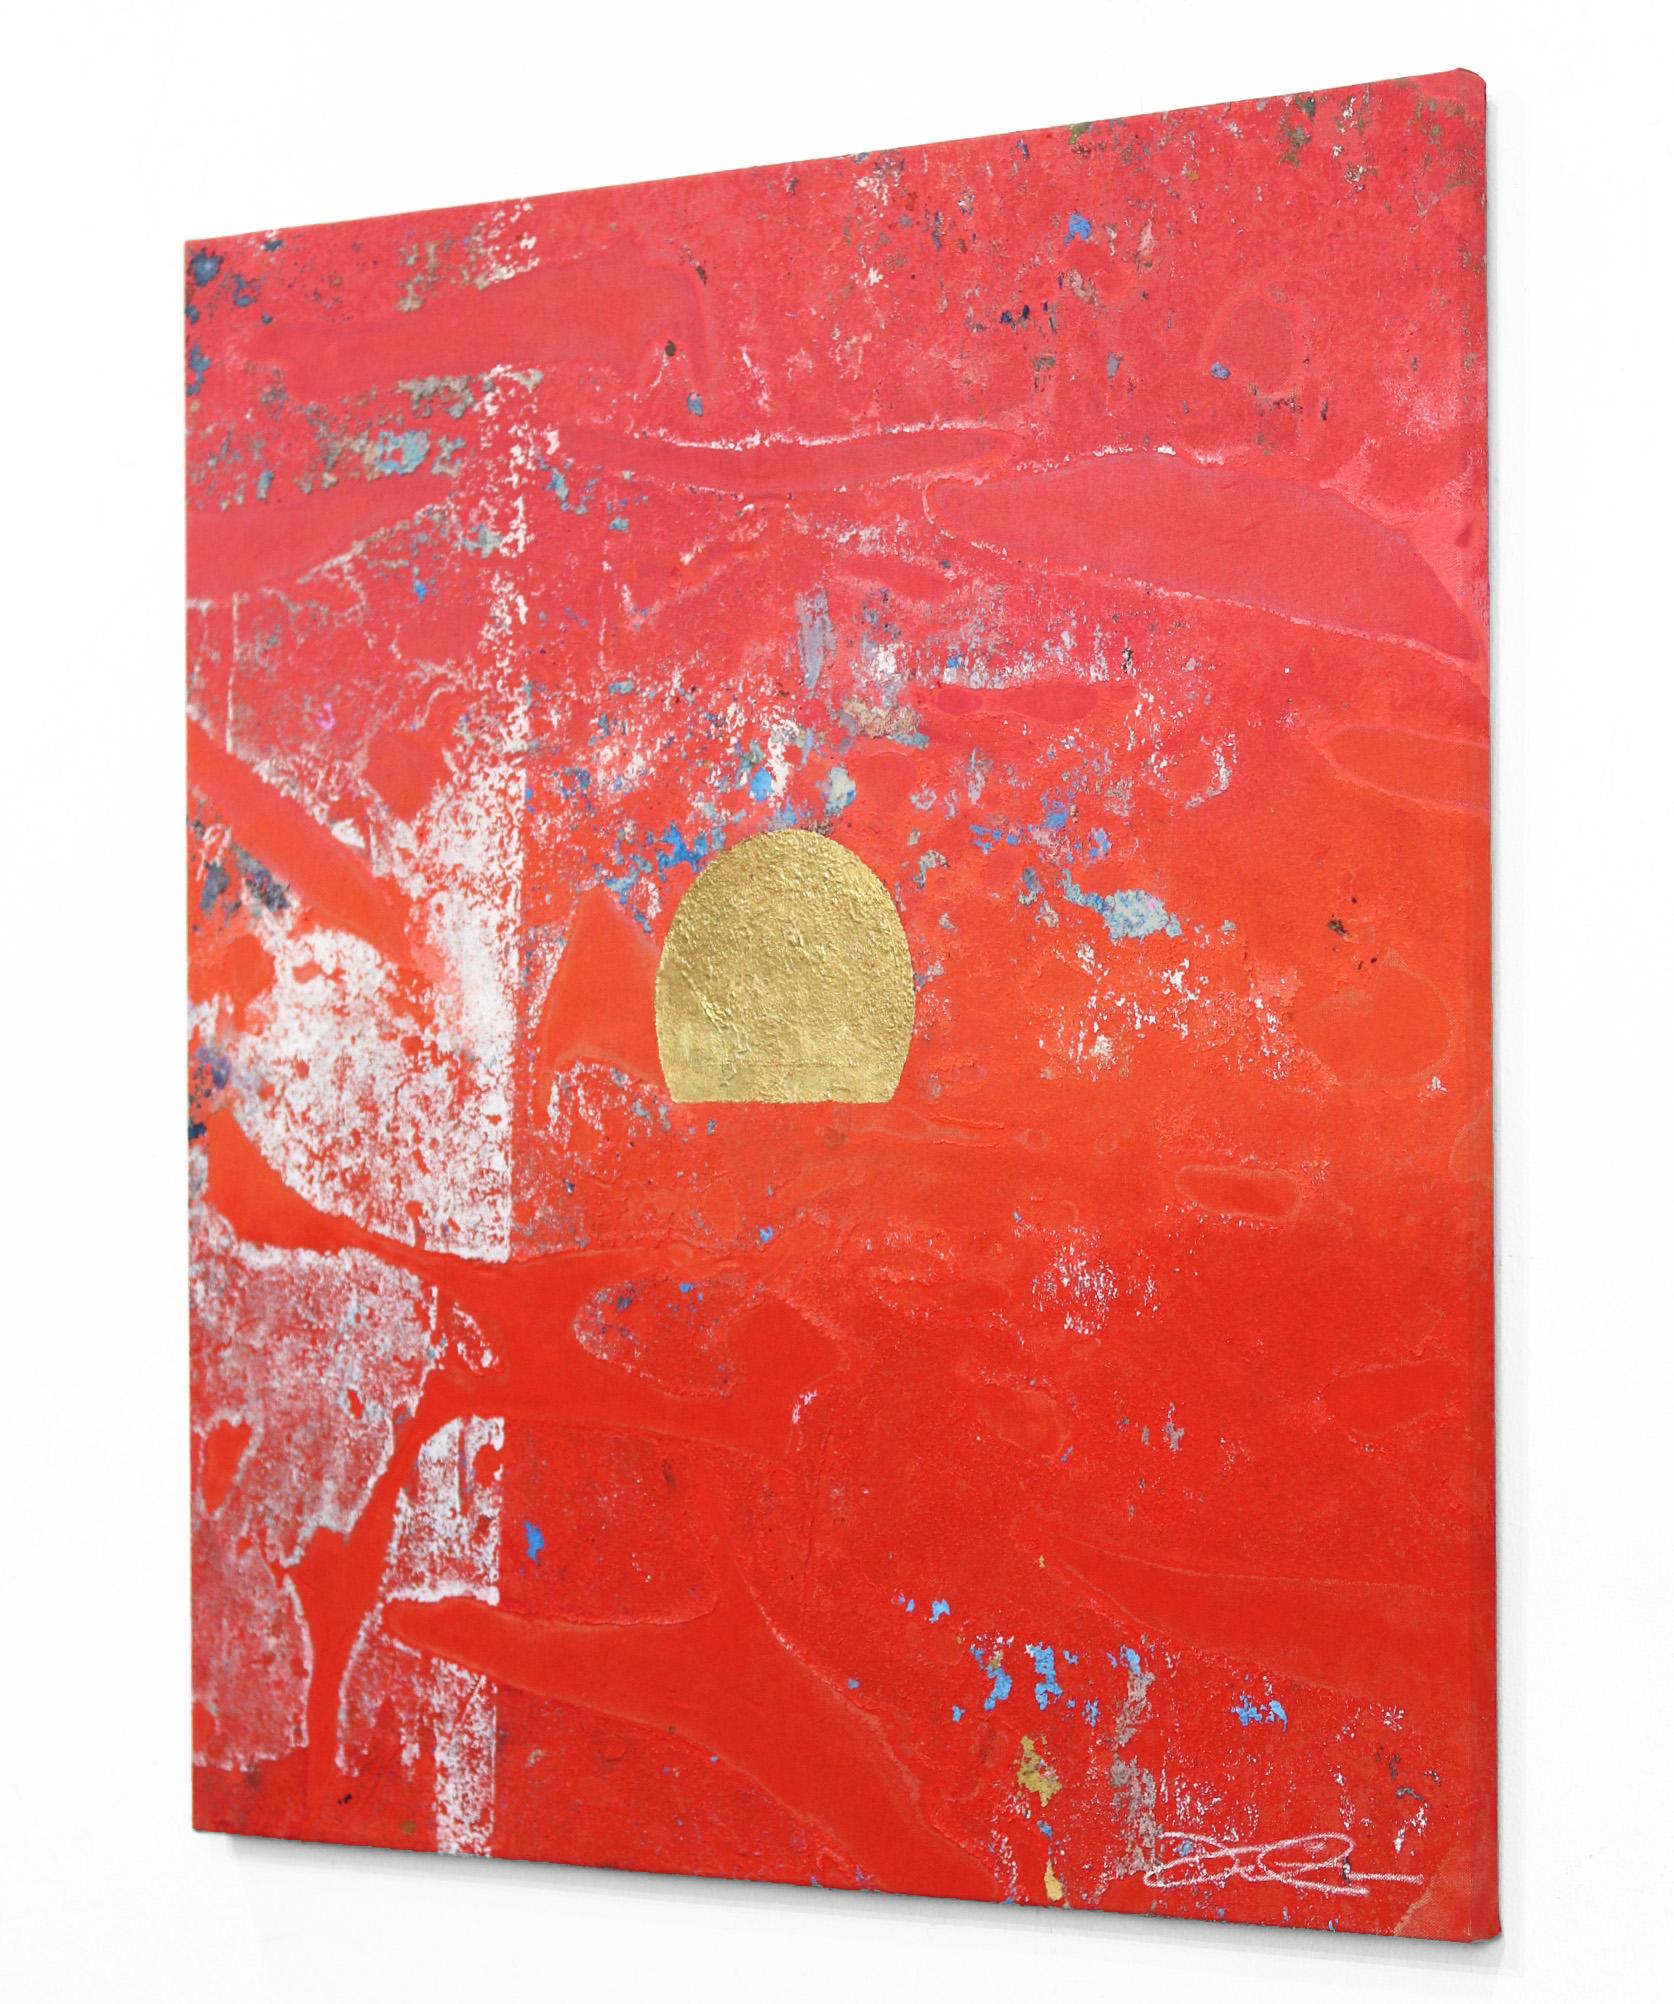 Concrete Sunset 1 - Bold Meditative Gold Leaf Red Painting on Linen Canvas - Abstract Art by Jason DeMeo